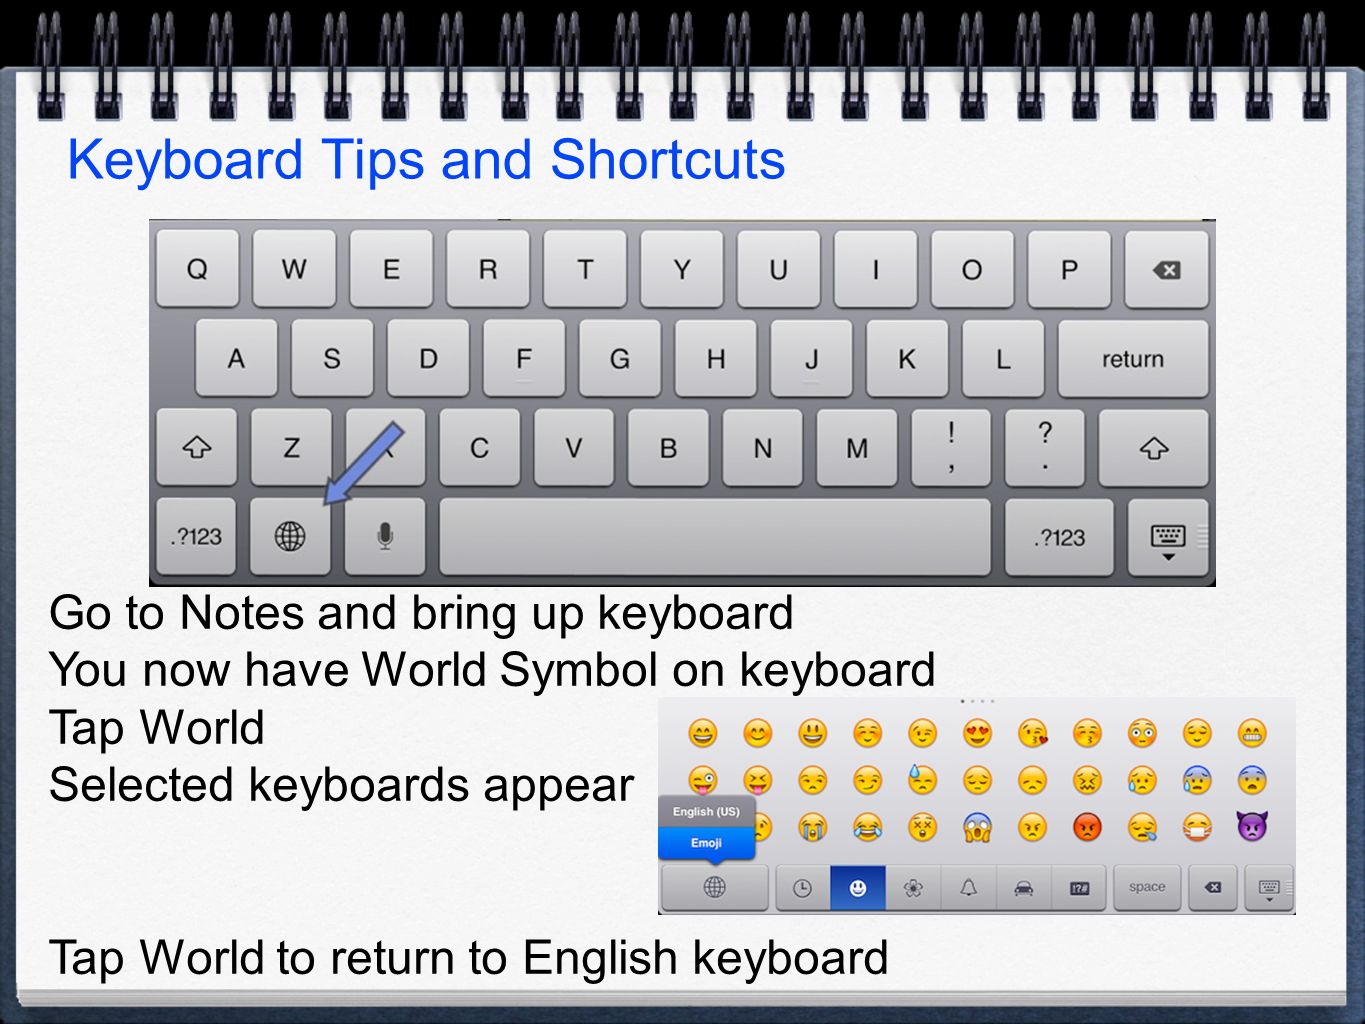 Go to Notes and bring up keyboard You now have World Symbol on keyboard Tap World Selected keyboards appear Tap World to return to English keyboard Keyboard Tips and Shortcuts